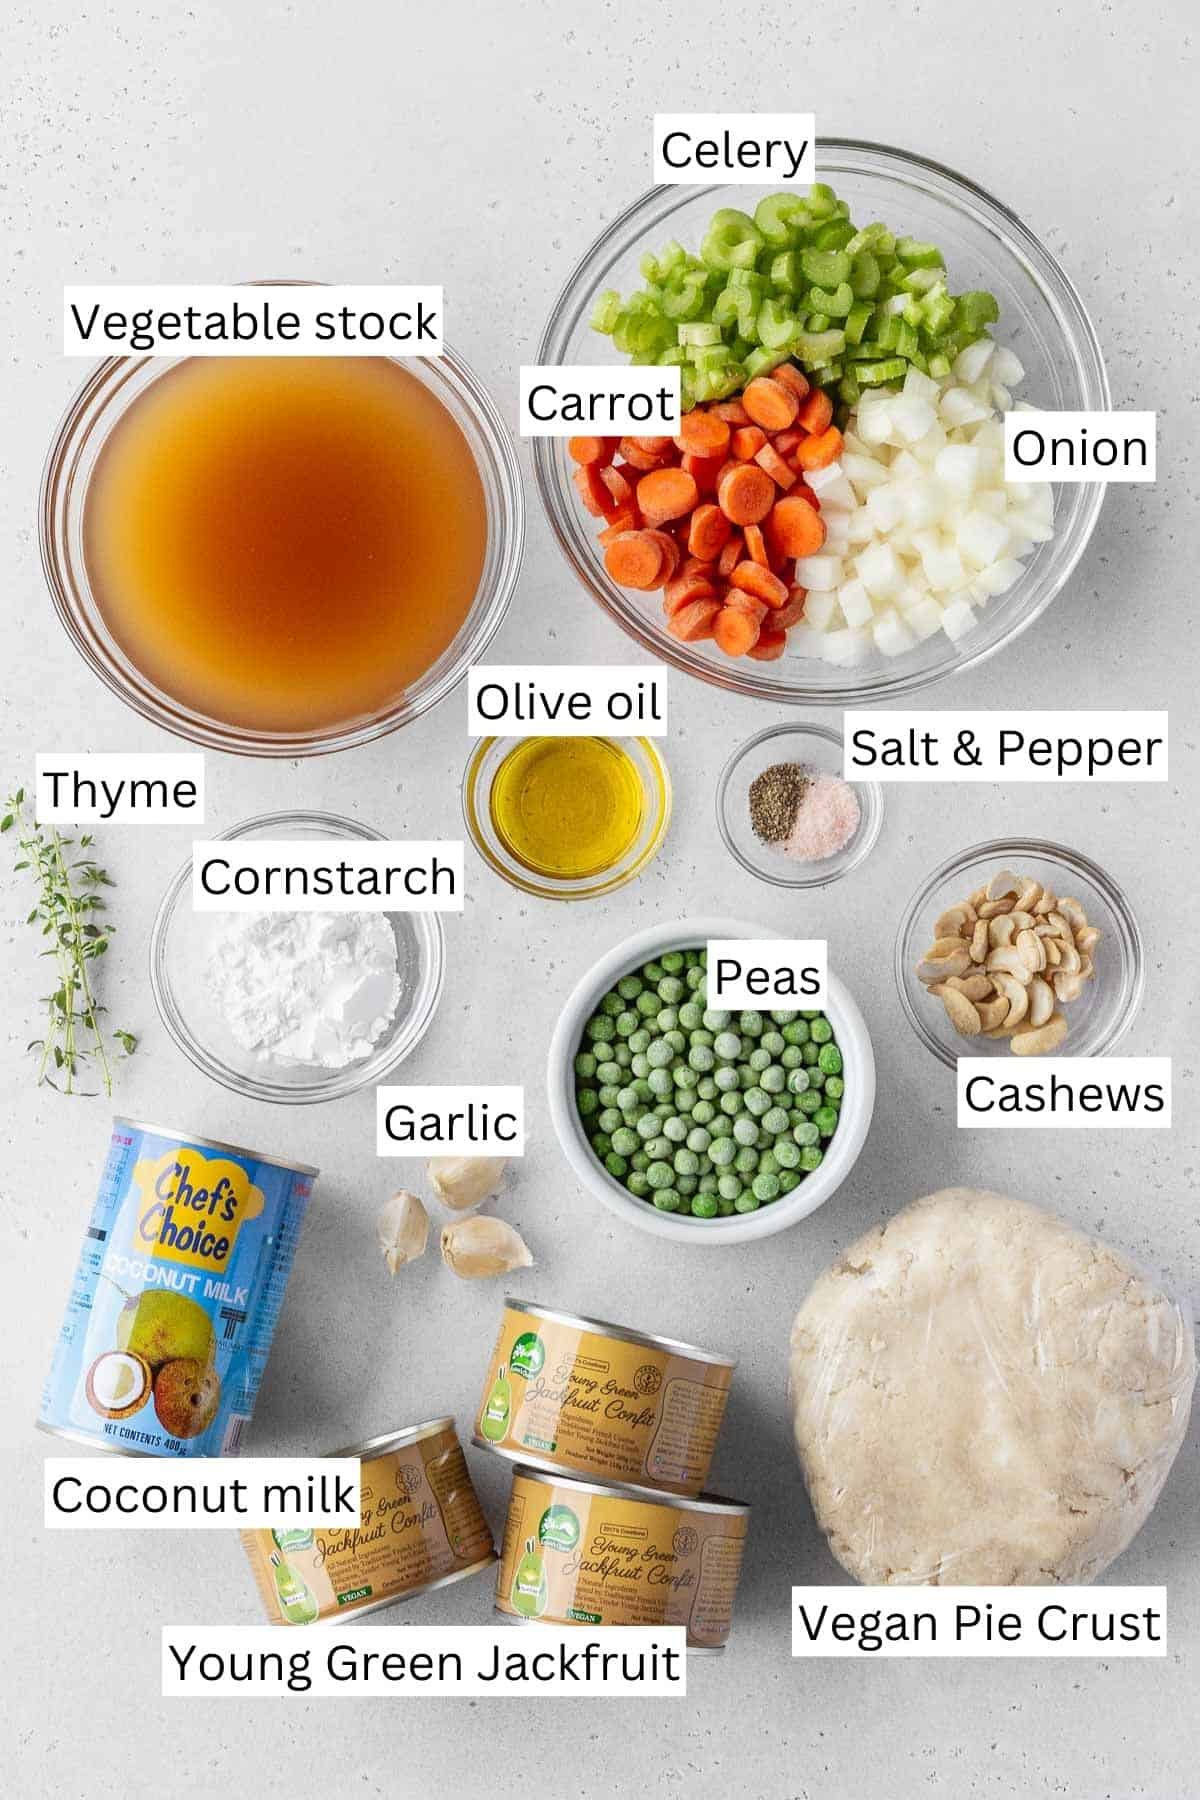 Ingredients for making vegan chicken pot pie measured out into bowls.